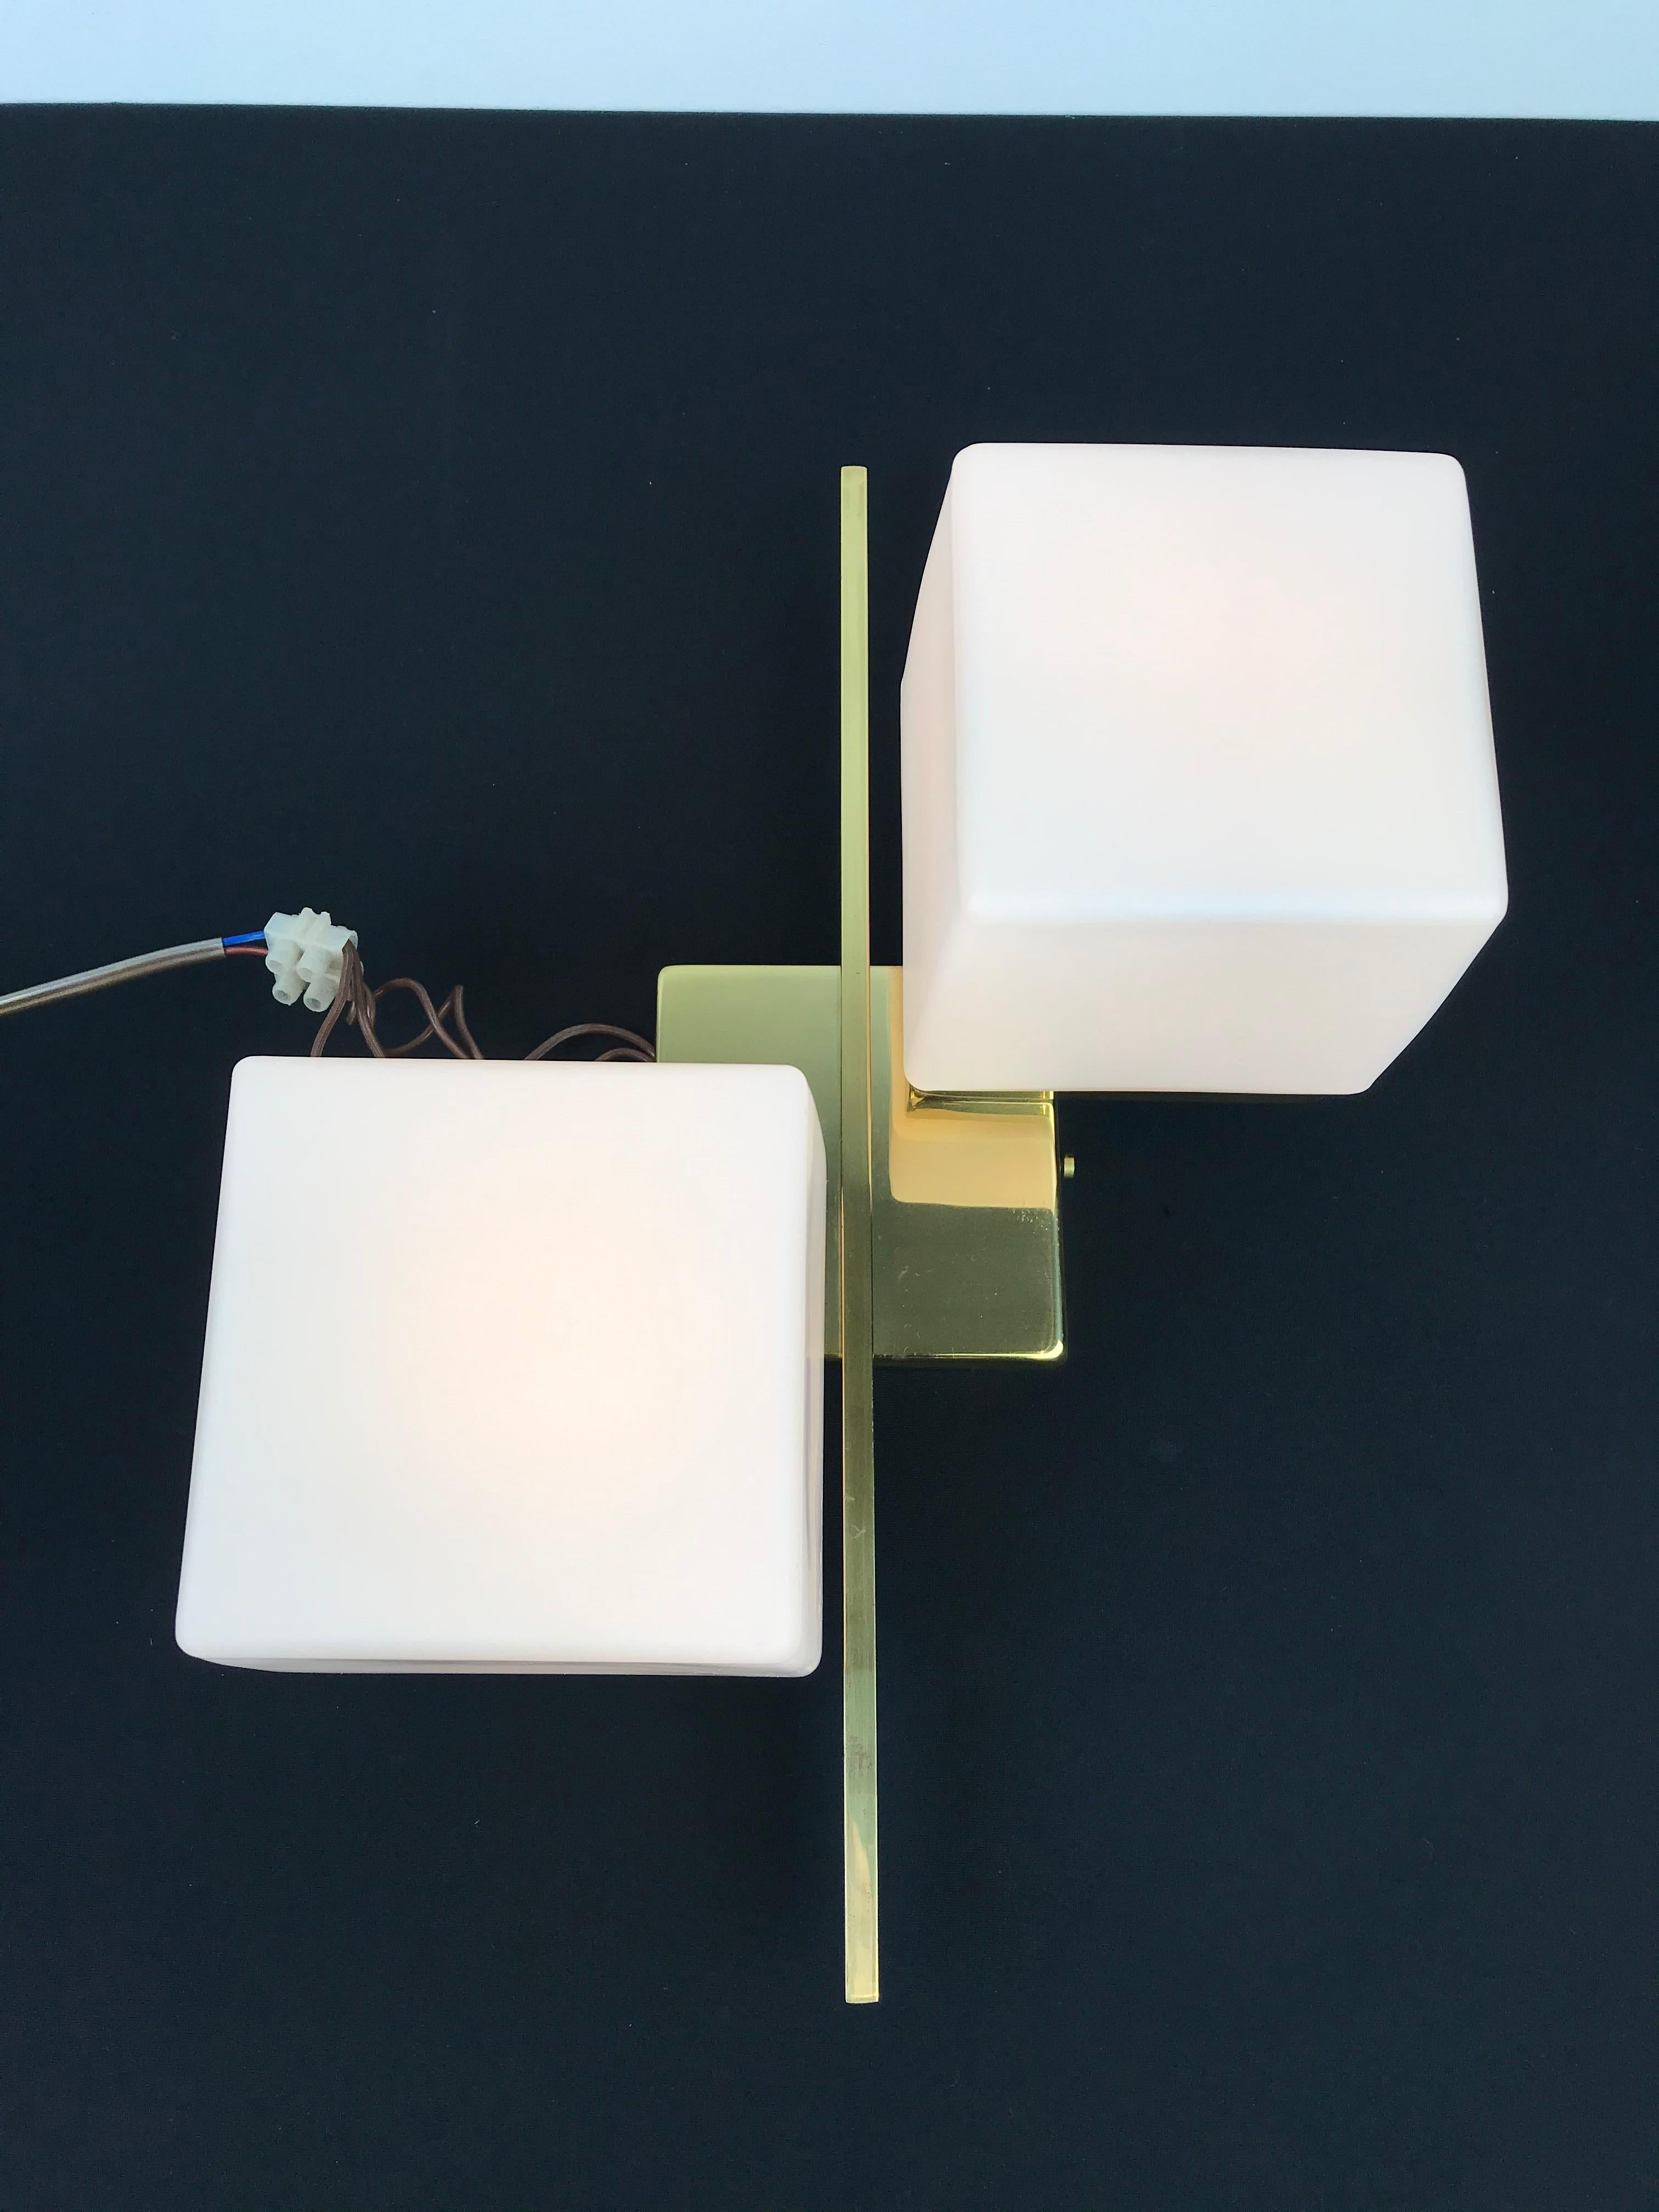 Cube Sciolari wall light - Sciolari Wall Scone
Wall light with two cube shaped milk glass shades on a brass frame. 
Cube shaped frame with a brass line or stripe between the two glass cubes.
Inside with white porcelain fittings E14.

This vintage